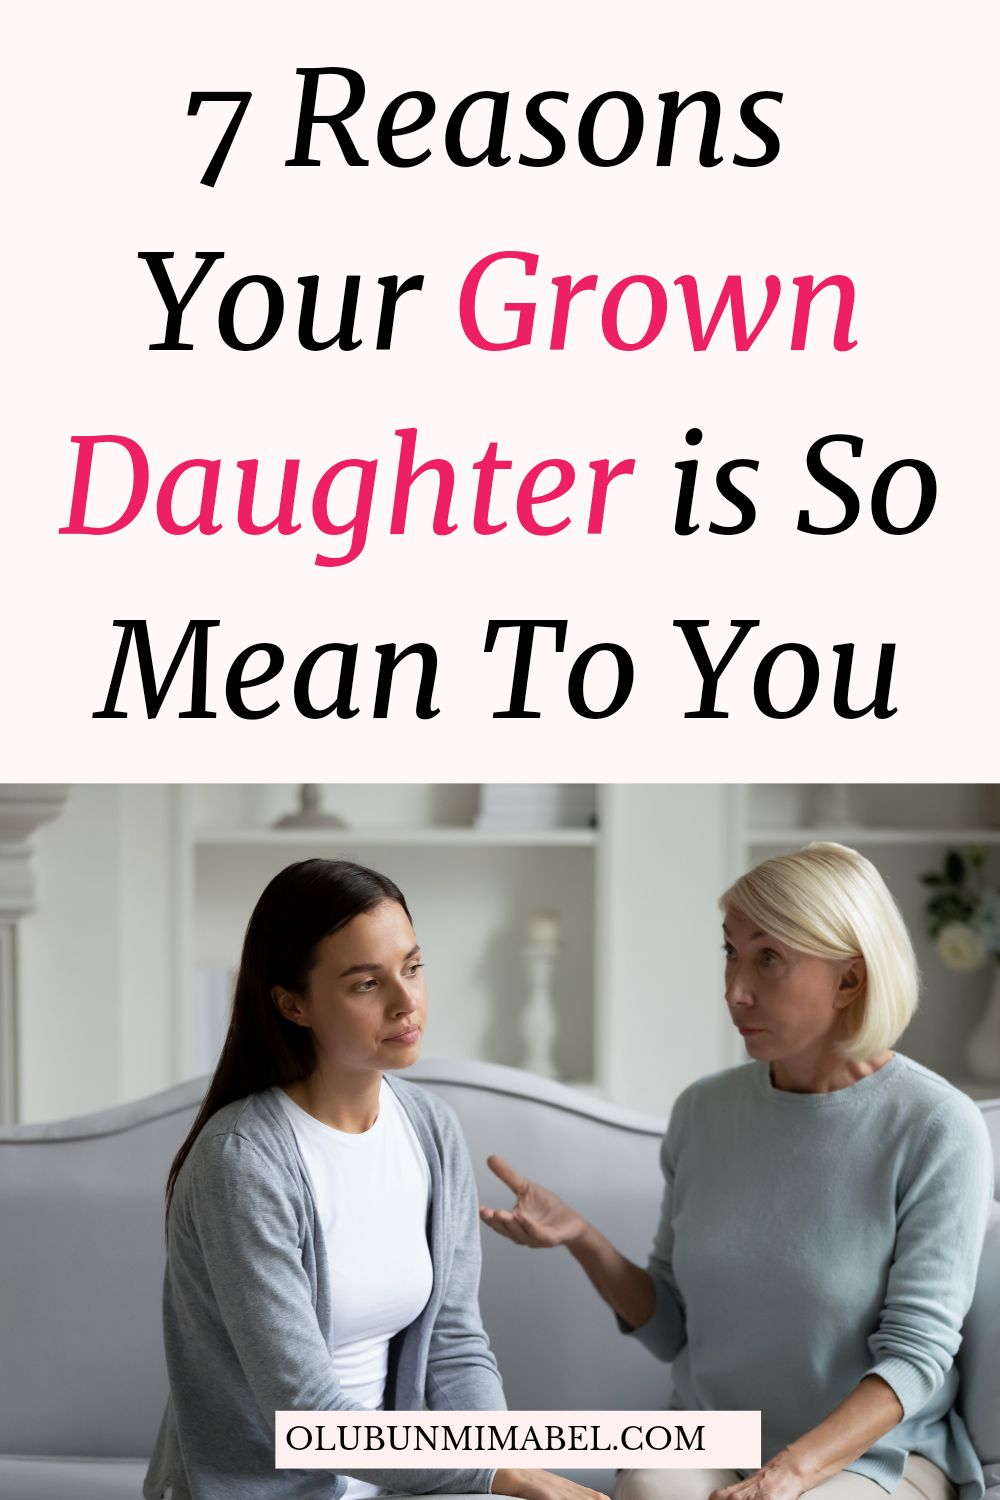 Why is My Grown Daughter So Mean To Me?